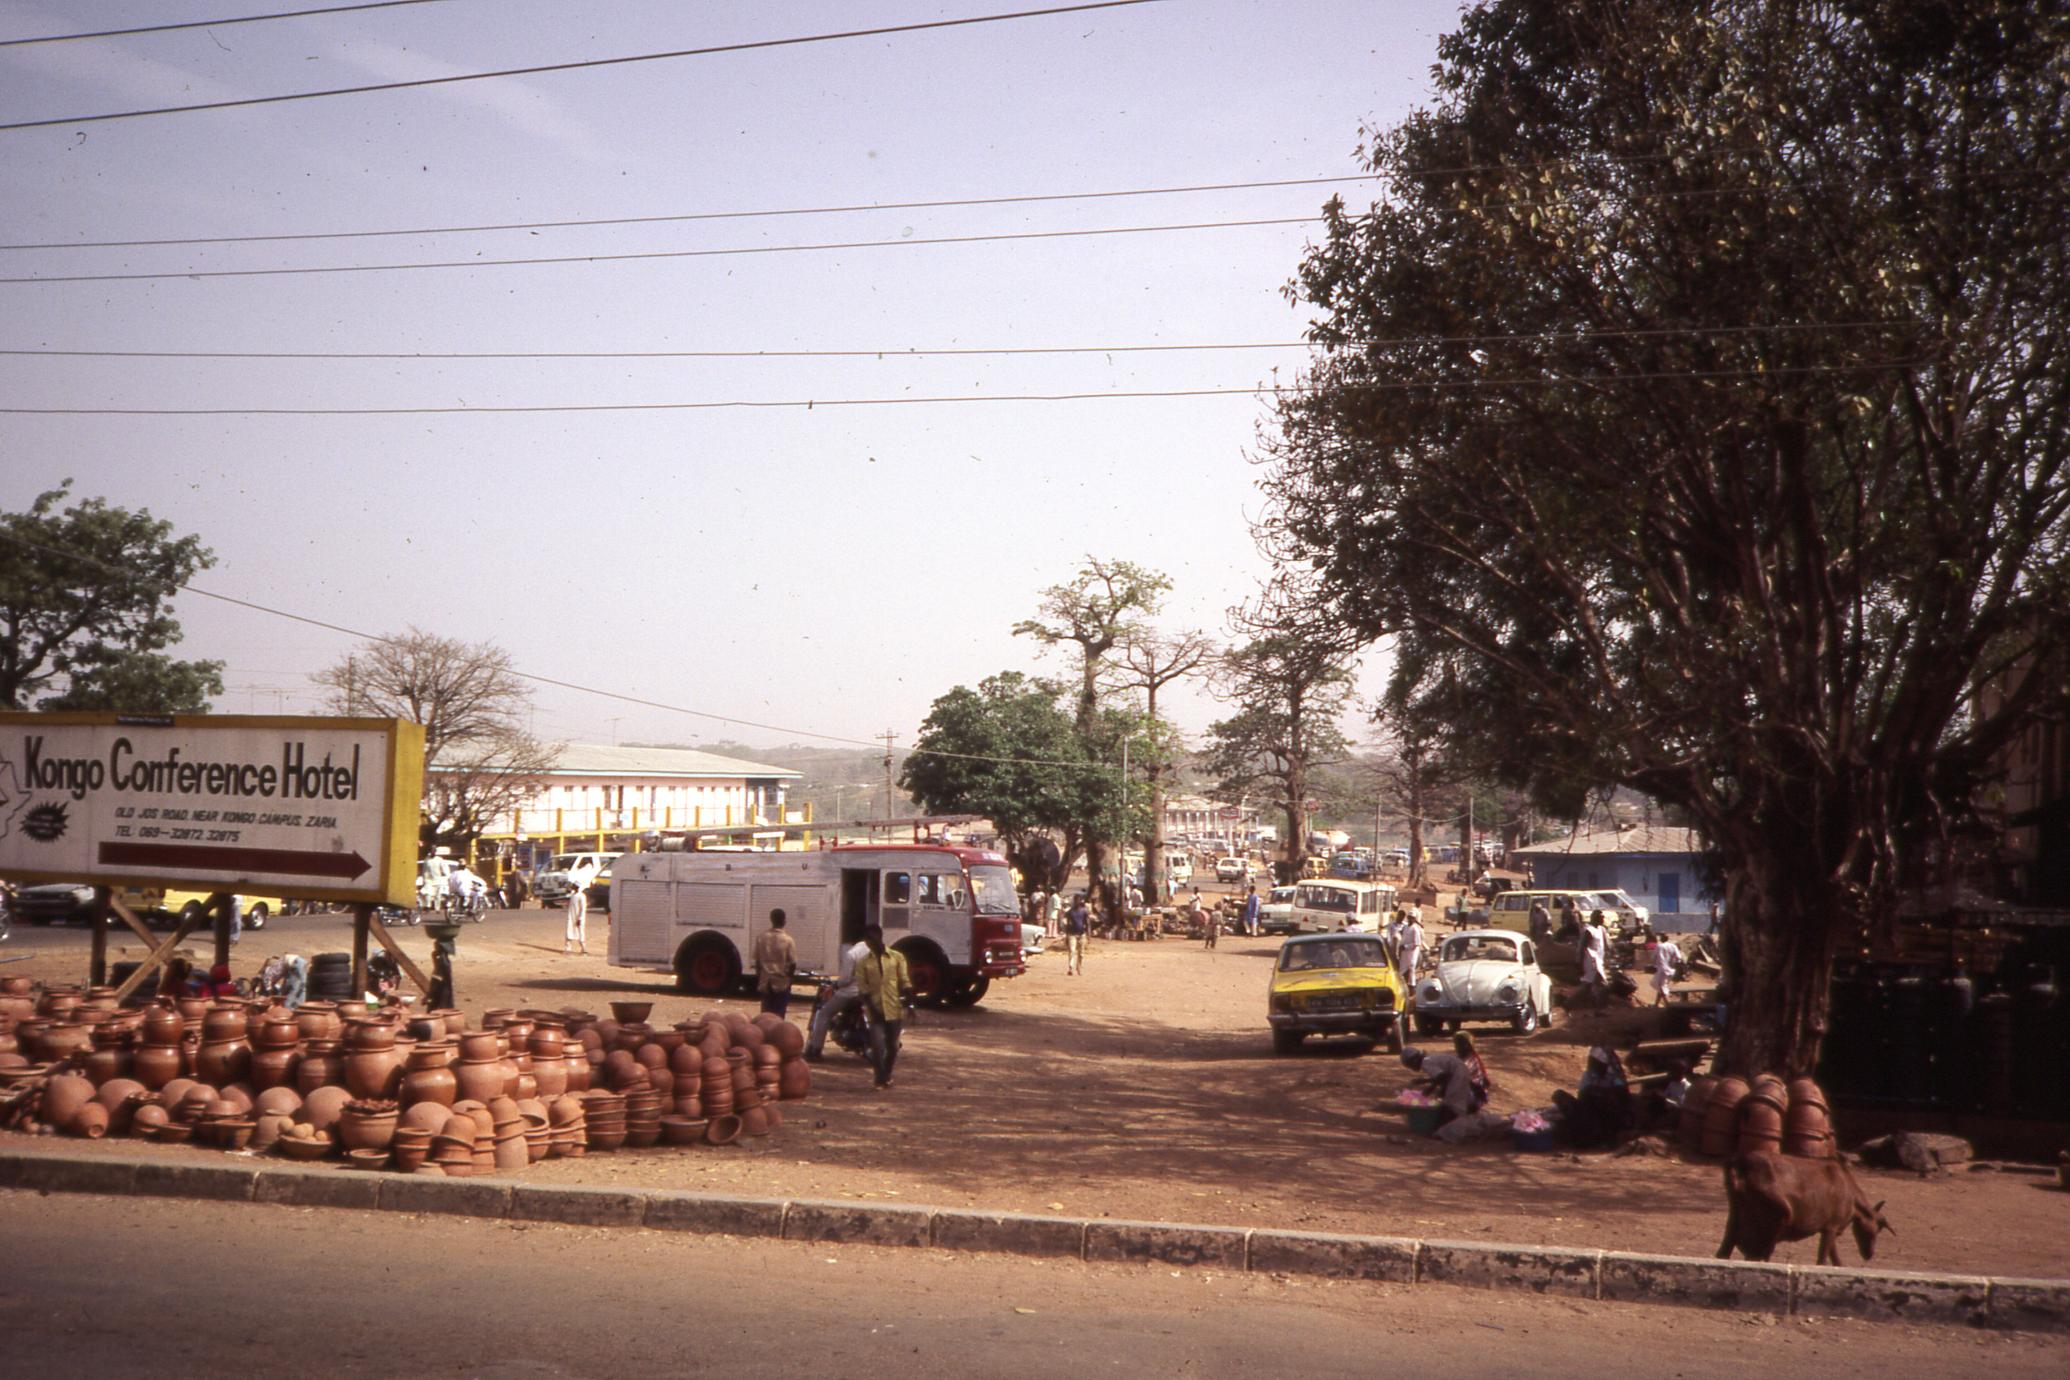 Pottery sellers near Kongo conference hotel